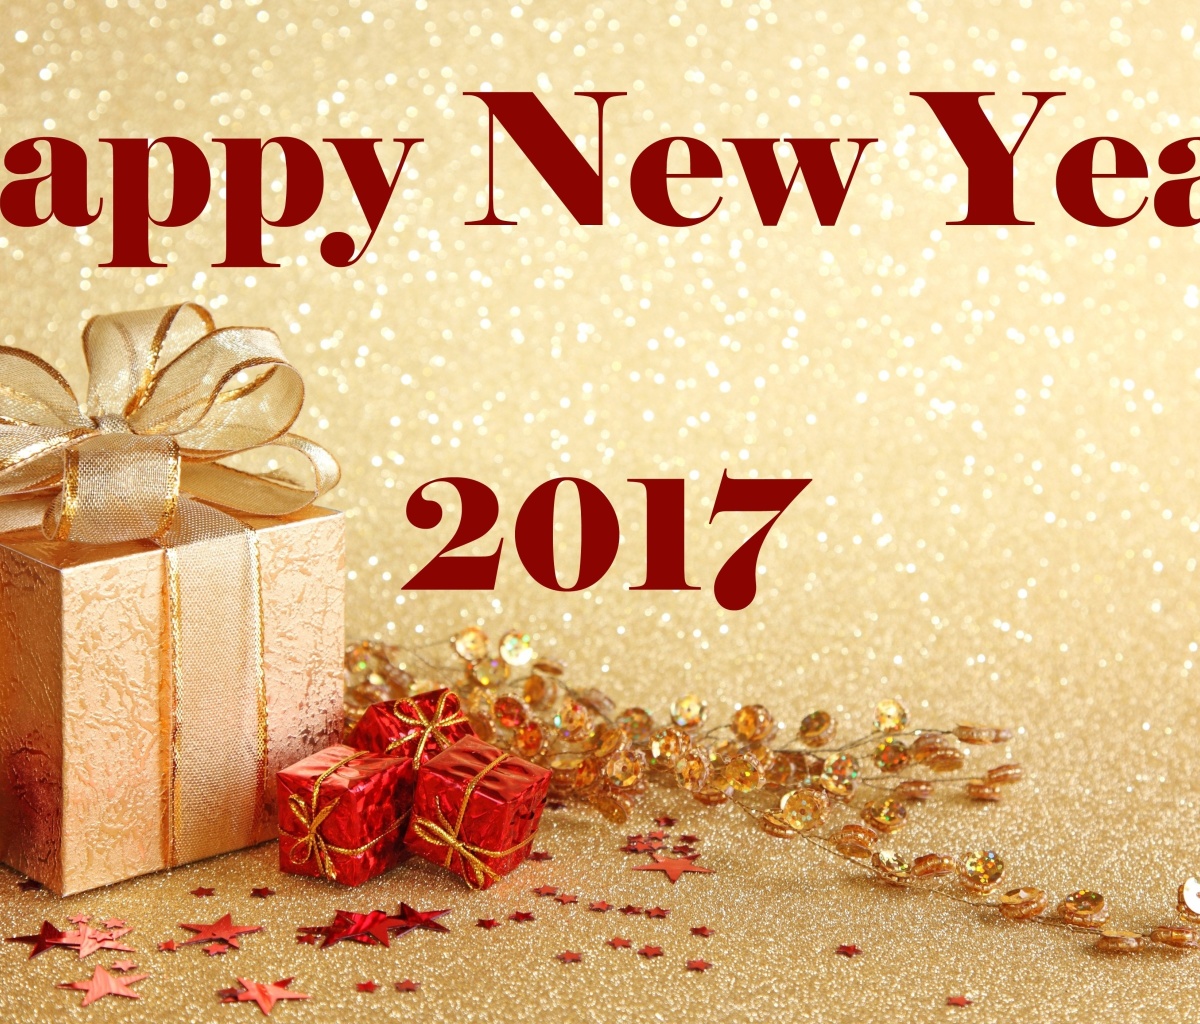 Das Happy New Year 2017 with Gifts Wallpaper 1200x1024